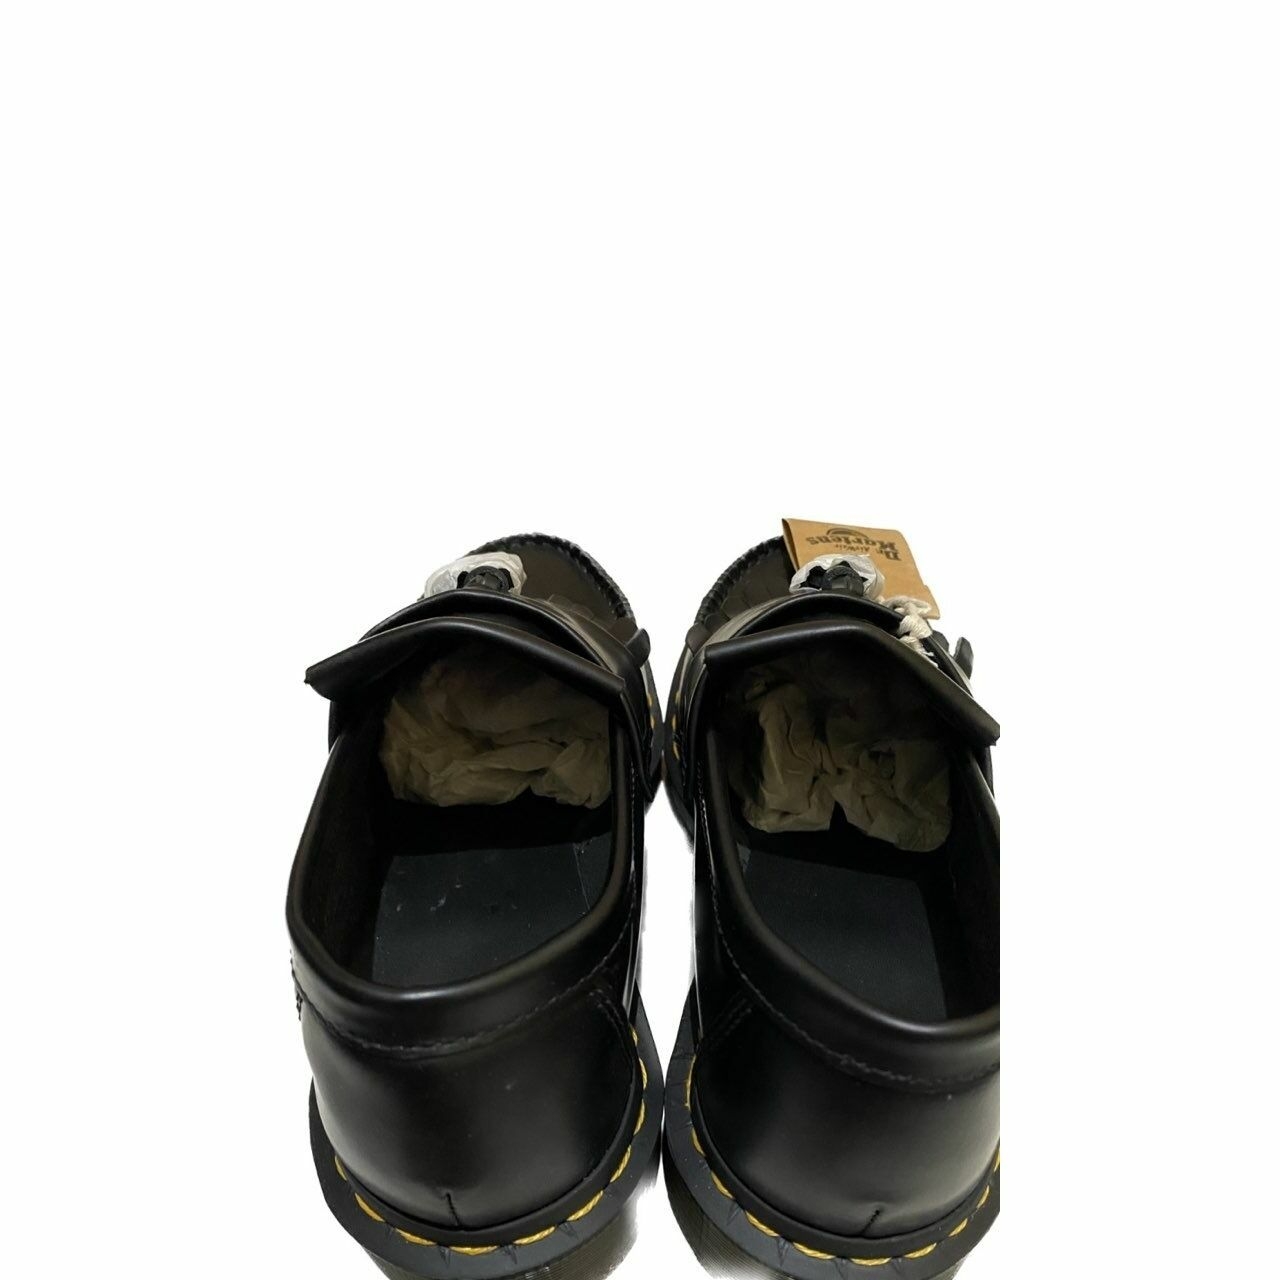 Drmartens Black Loafers Flats